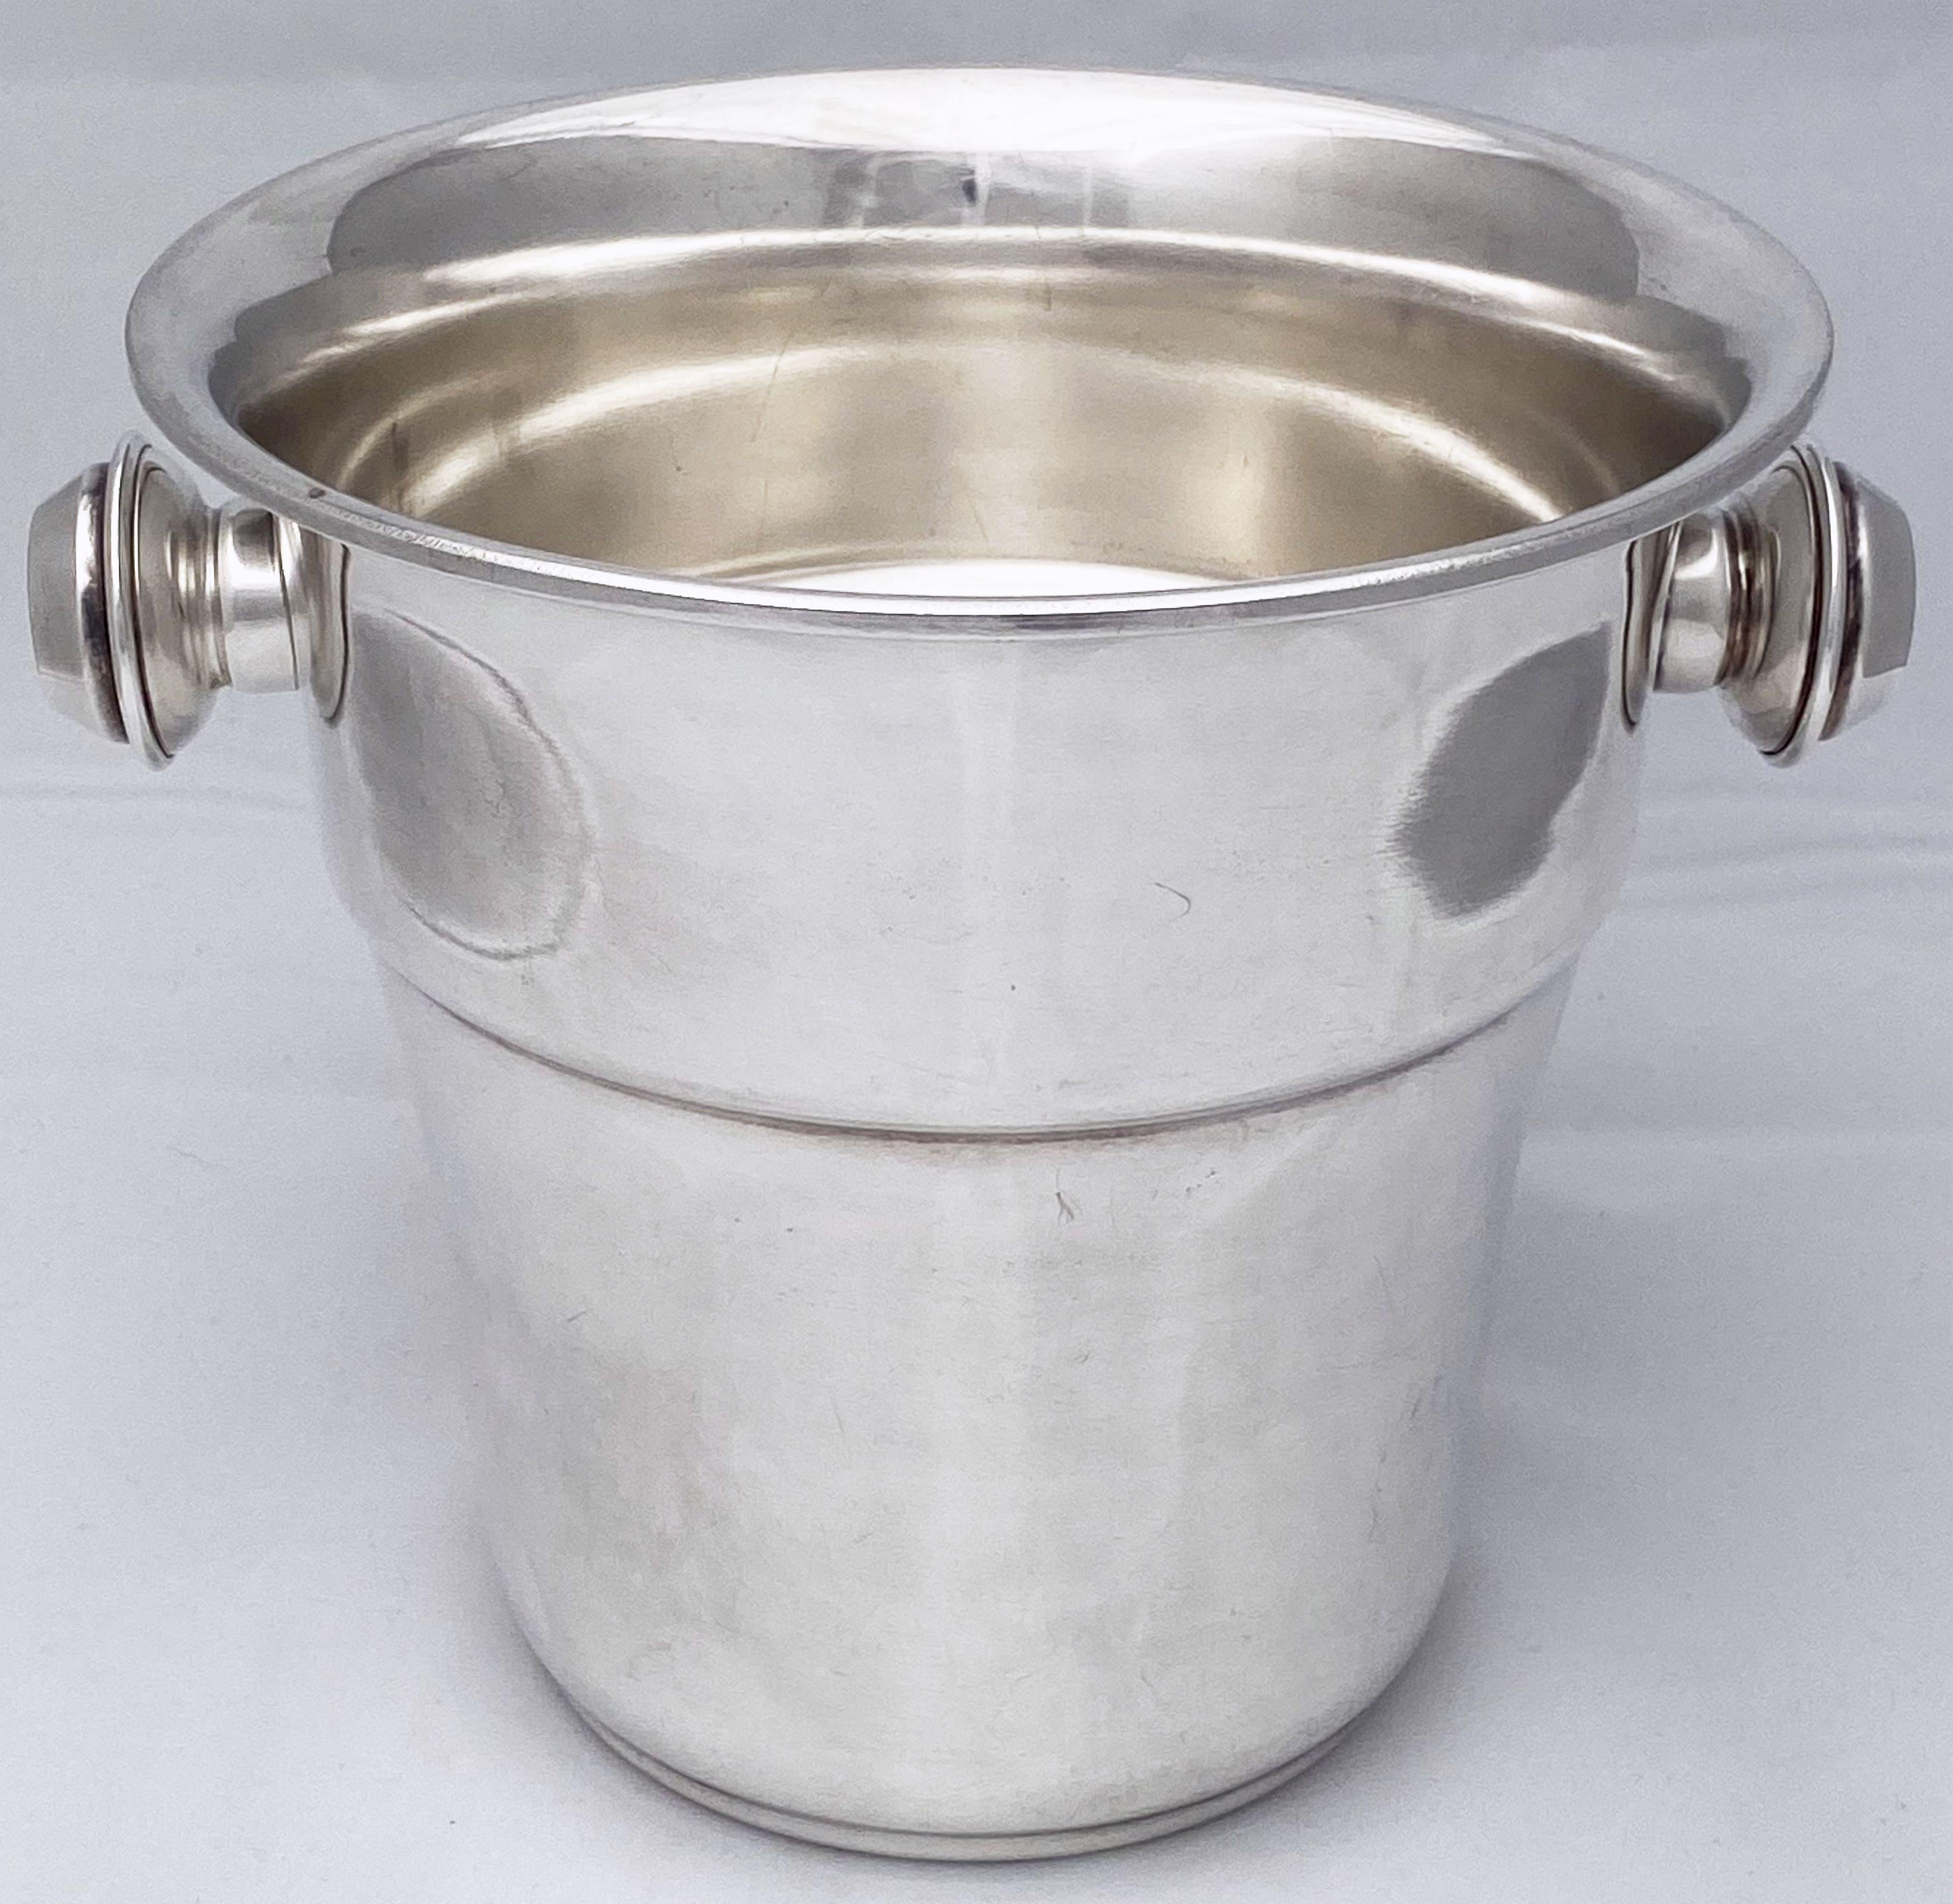 Metal English Wine Cooler or Champagne Bucket